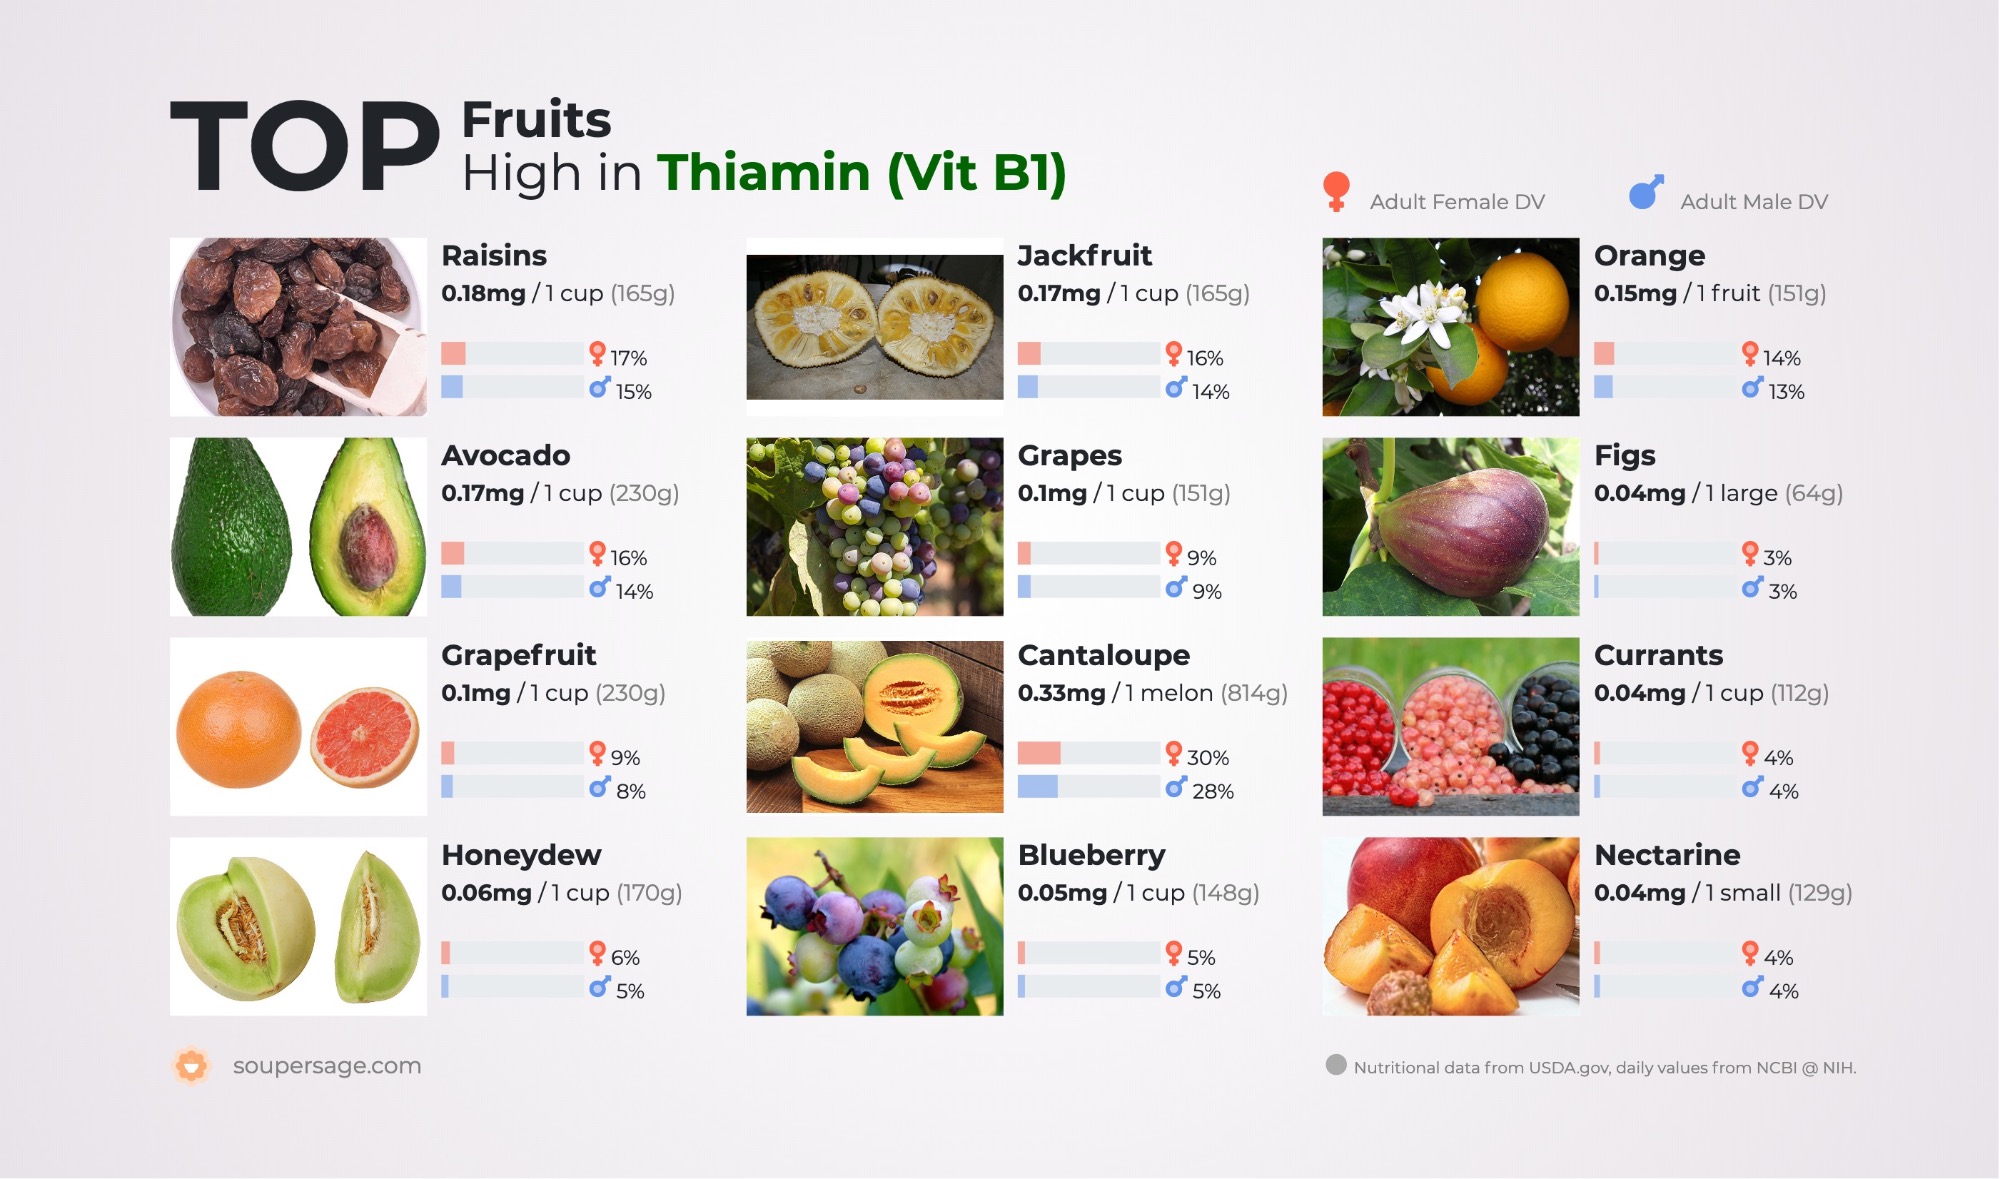 image of Top Fruits High in Thiamin (Vit B1)